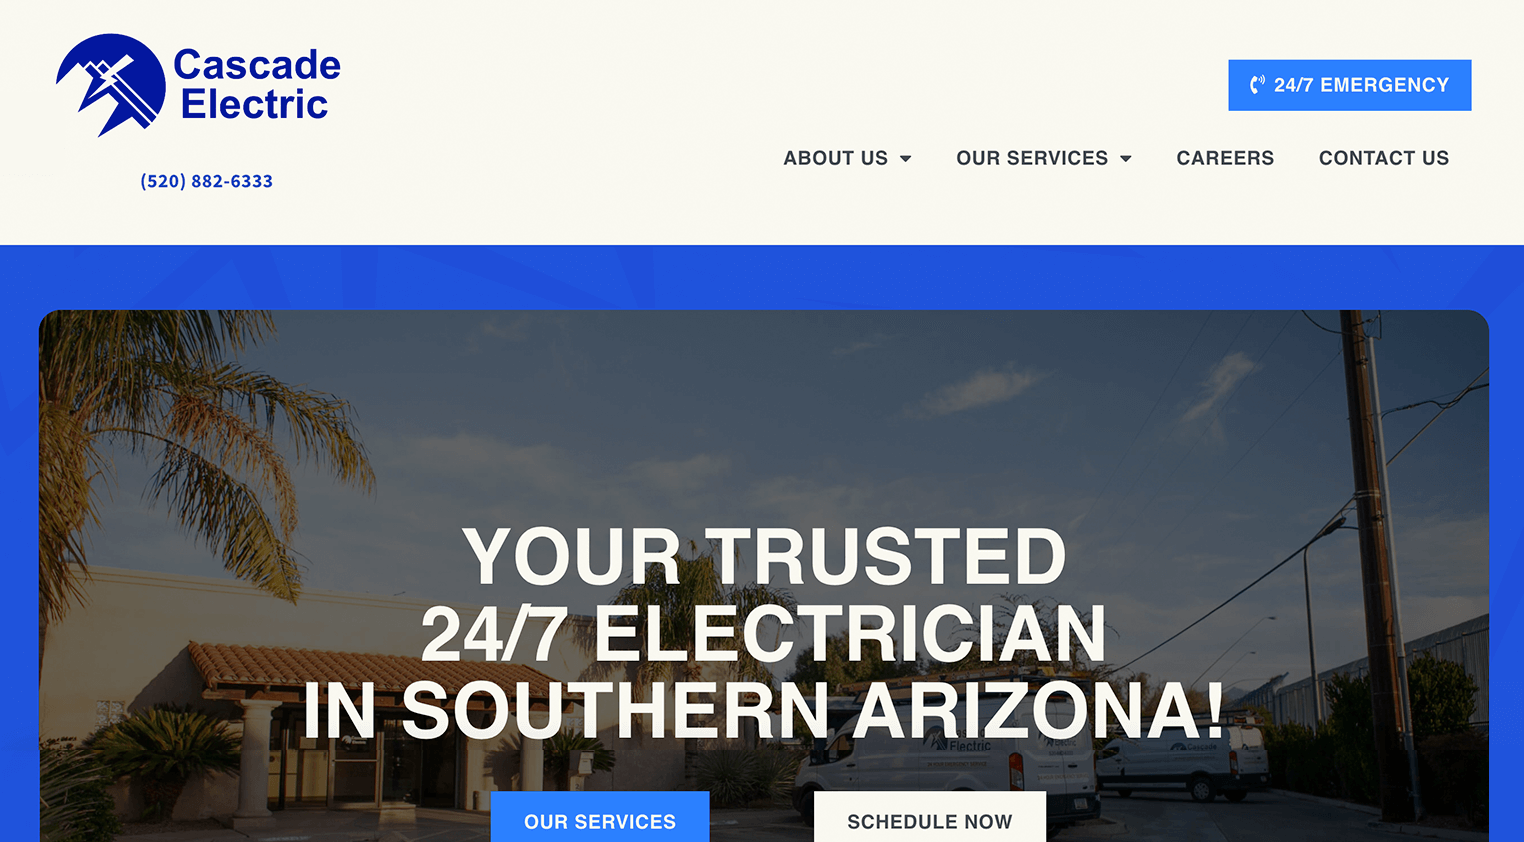 Newly designed website for Cascade Electric completed by Anchor Wave